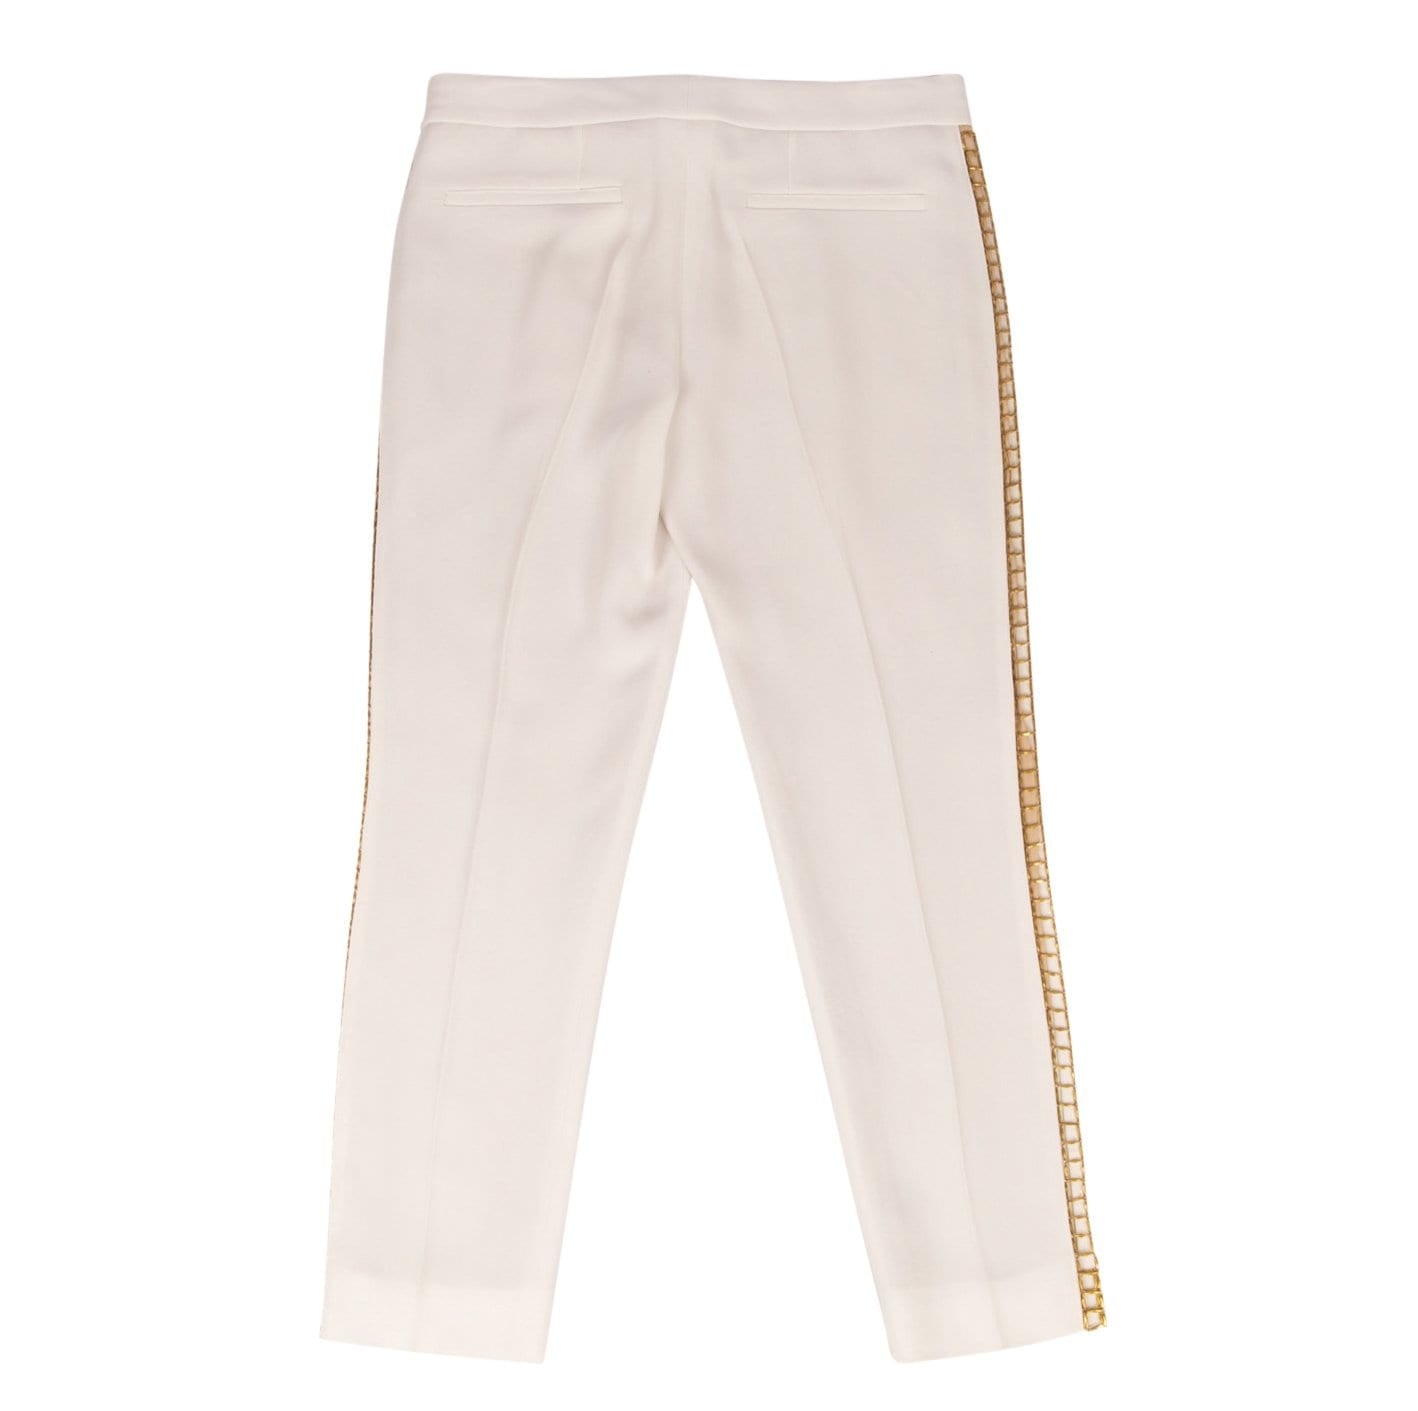 Chloe Pant Winter White w/ Open Gold Metal Detail 36 / 4 - mightychic